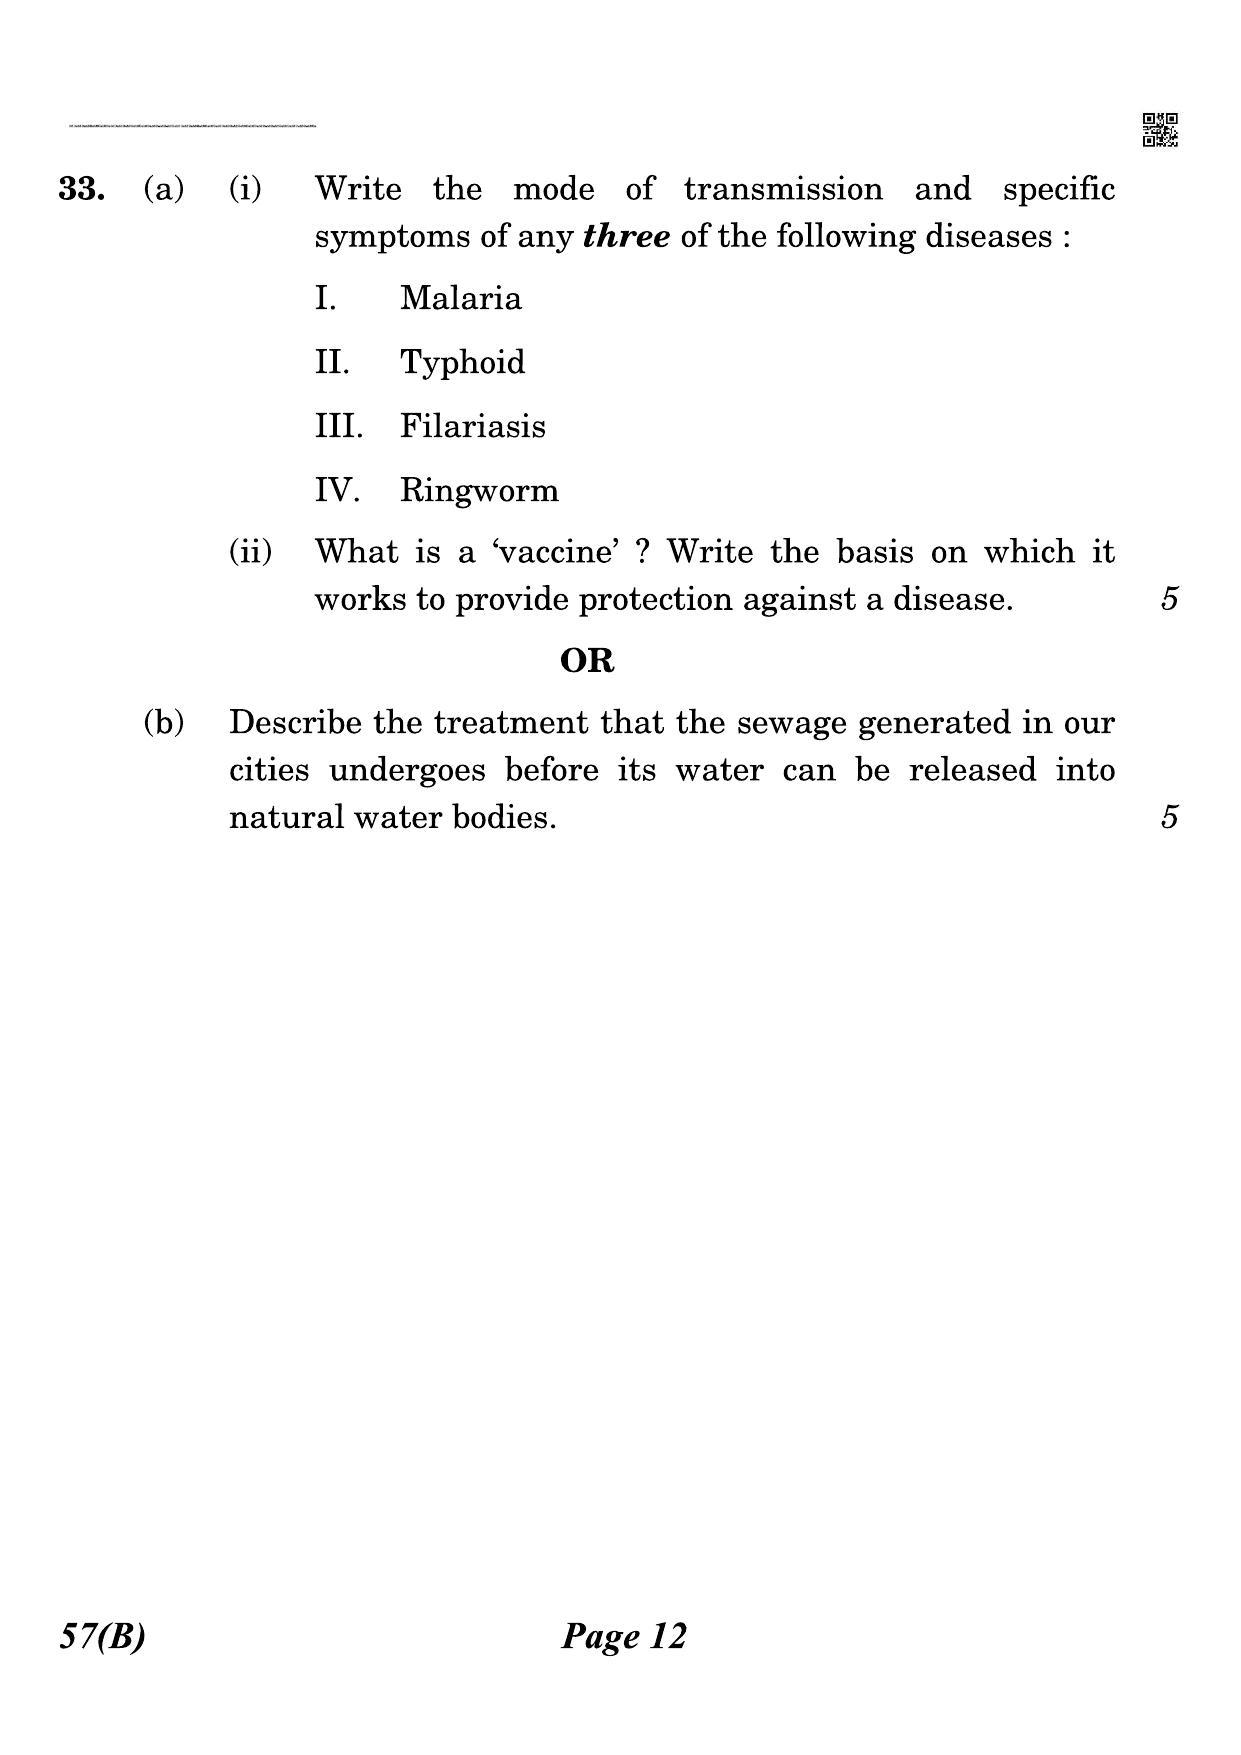 CBSE Class 12 QP_044_biology_for_visually_impared_candidates 2021 Compartment Question Paper - Page 12